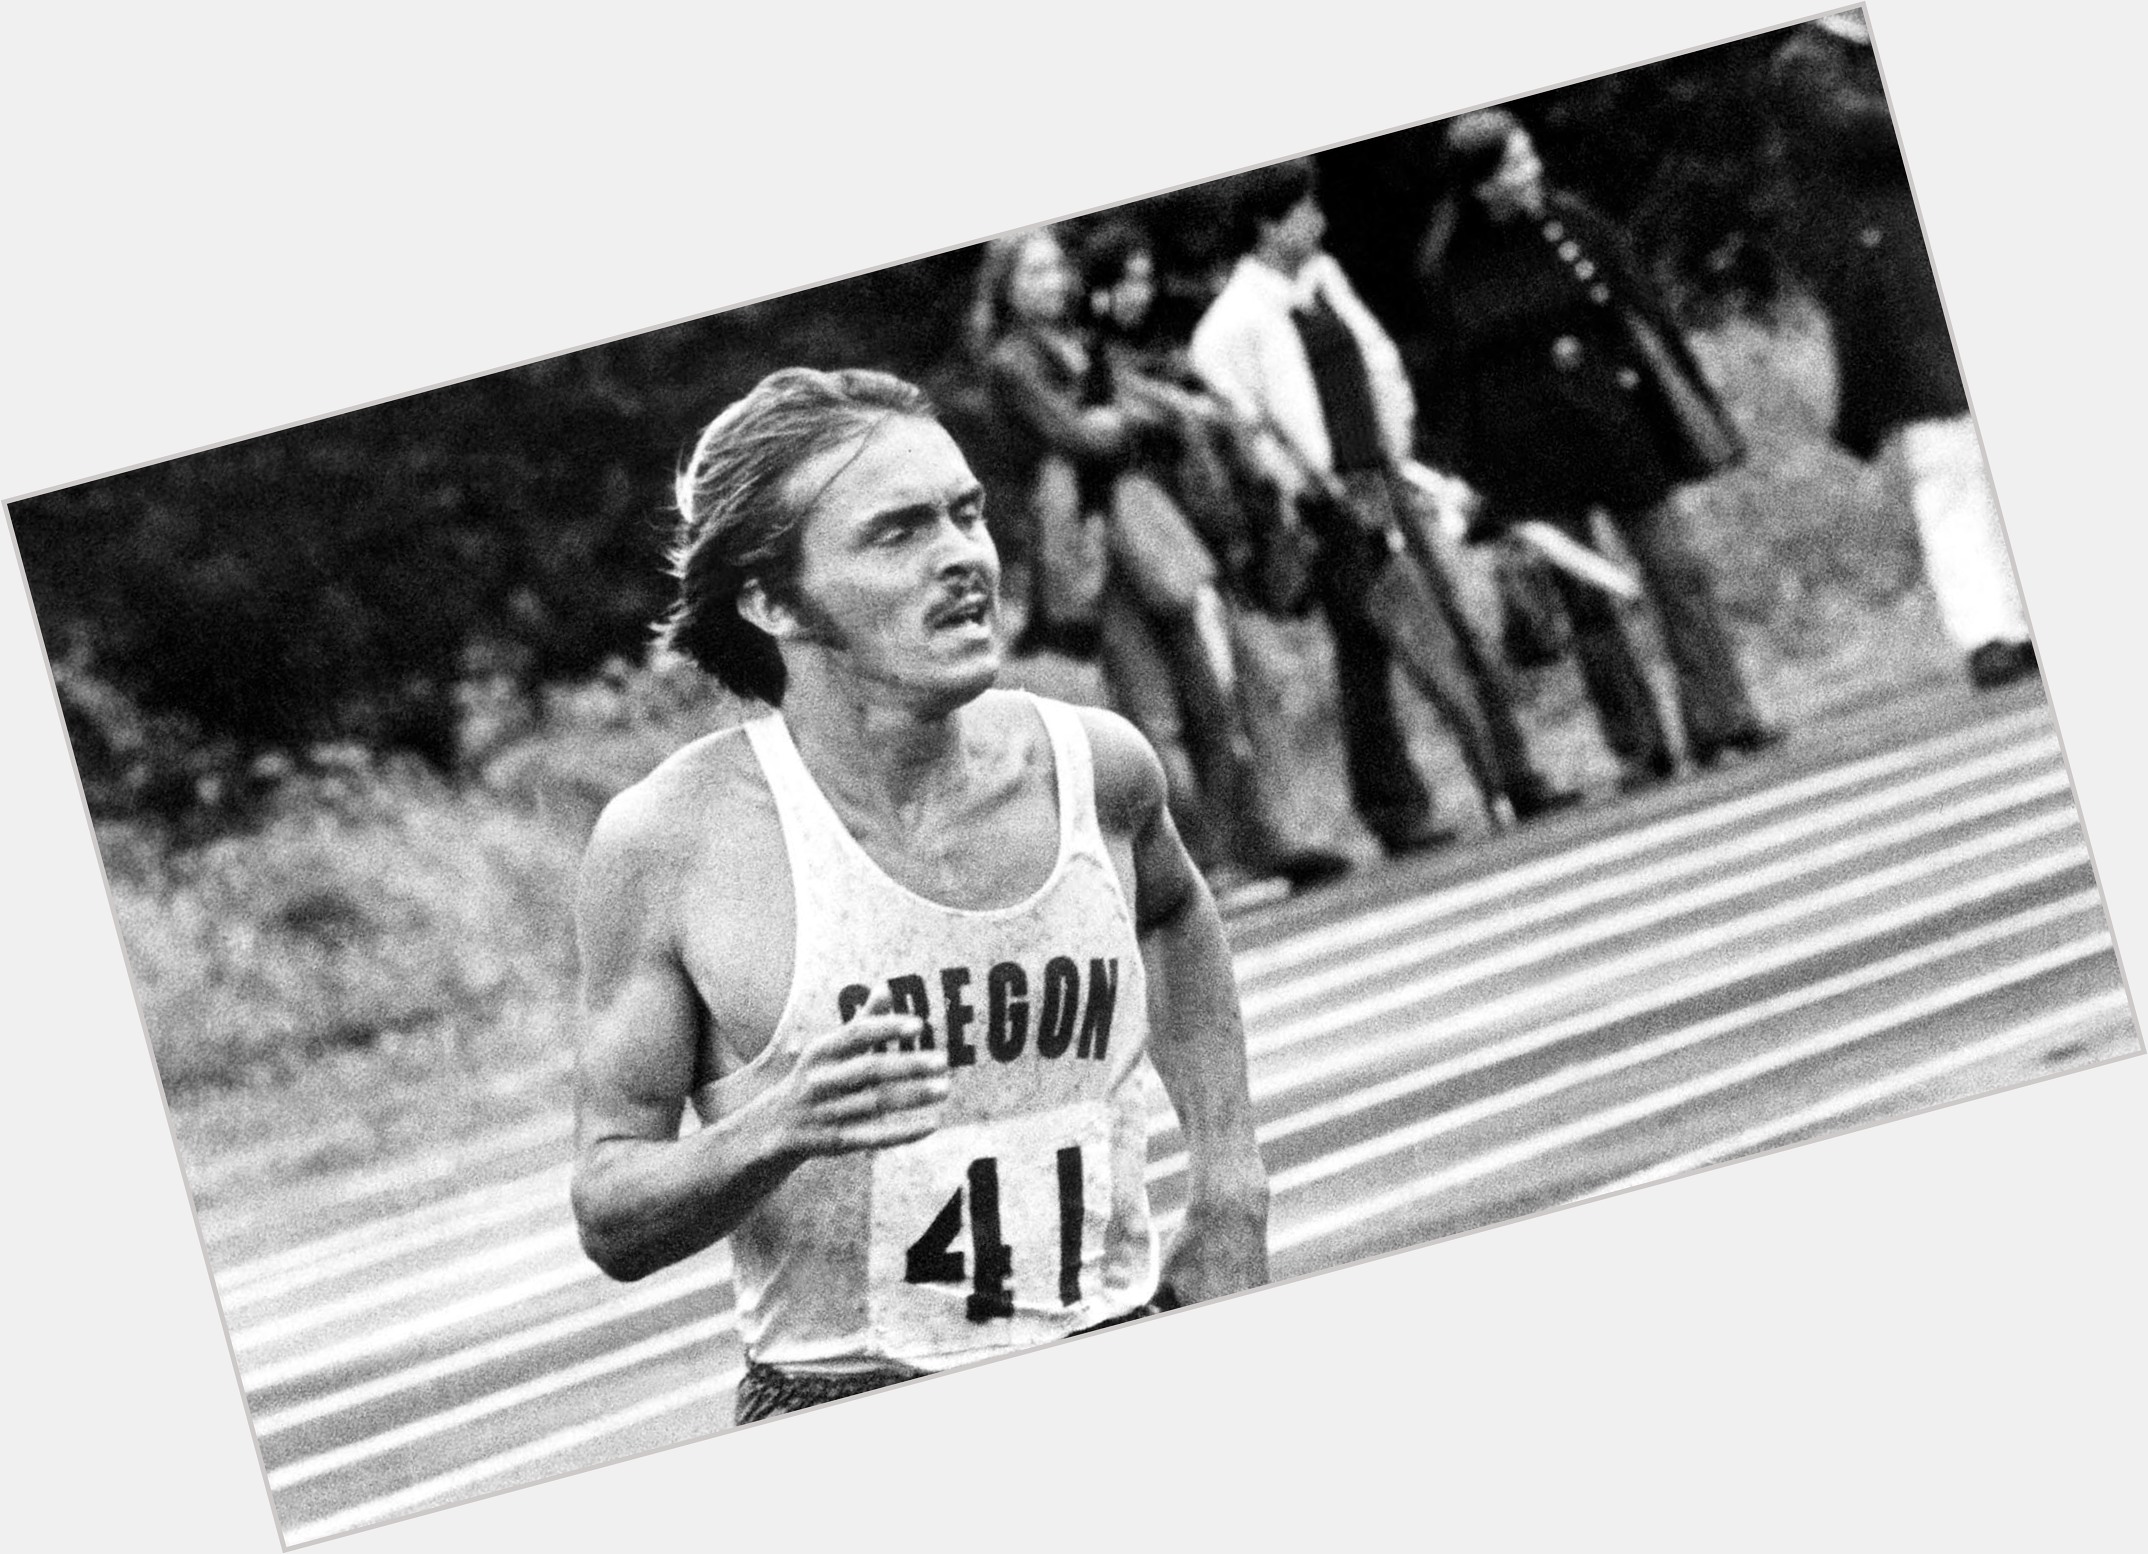 Steve Prefontaine light brown hair & hairstyles Athletic body, 